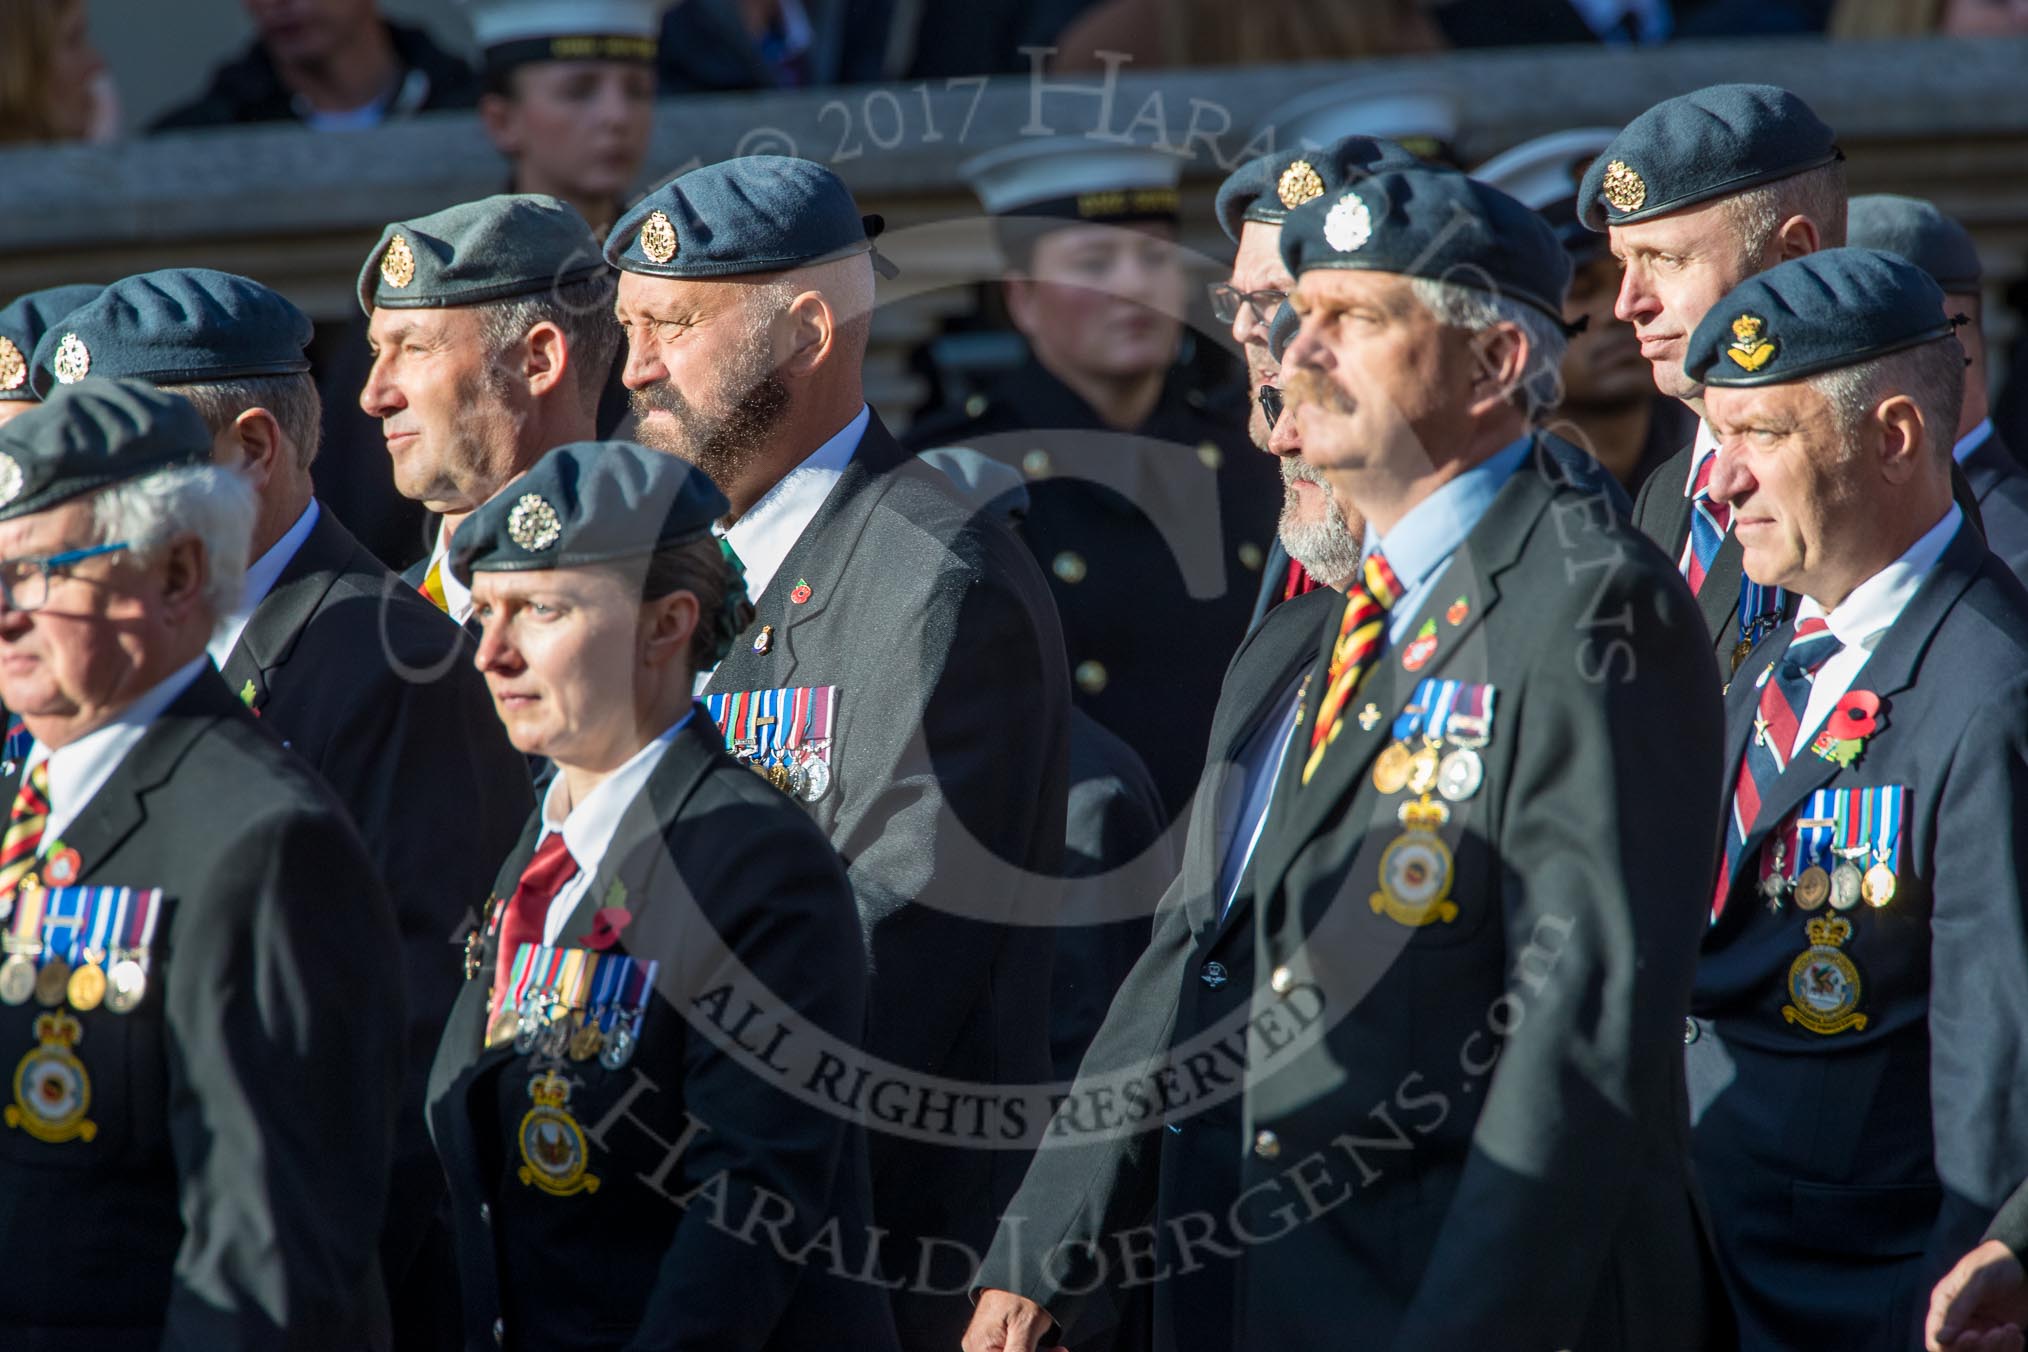 Harrier Force Association (Group C25, 100 members) during the Royal British Legion March Past on Remembrance Sunday at the Cenotaph, Whitehall, Westminster, London, 11 November 2018, 12:18.